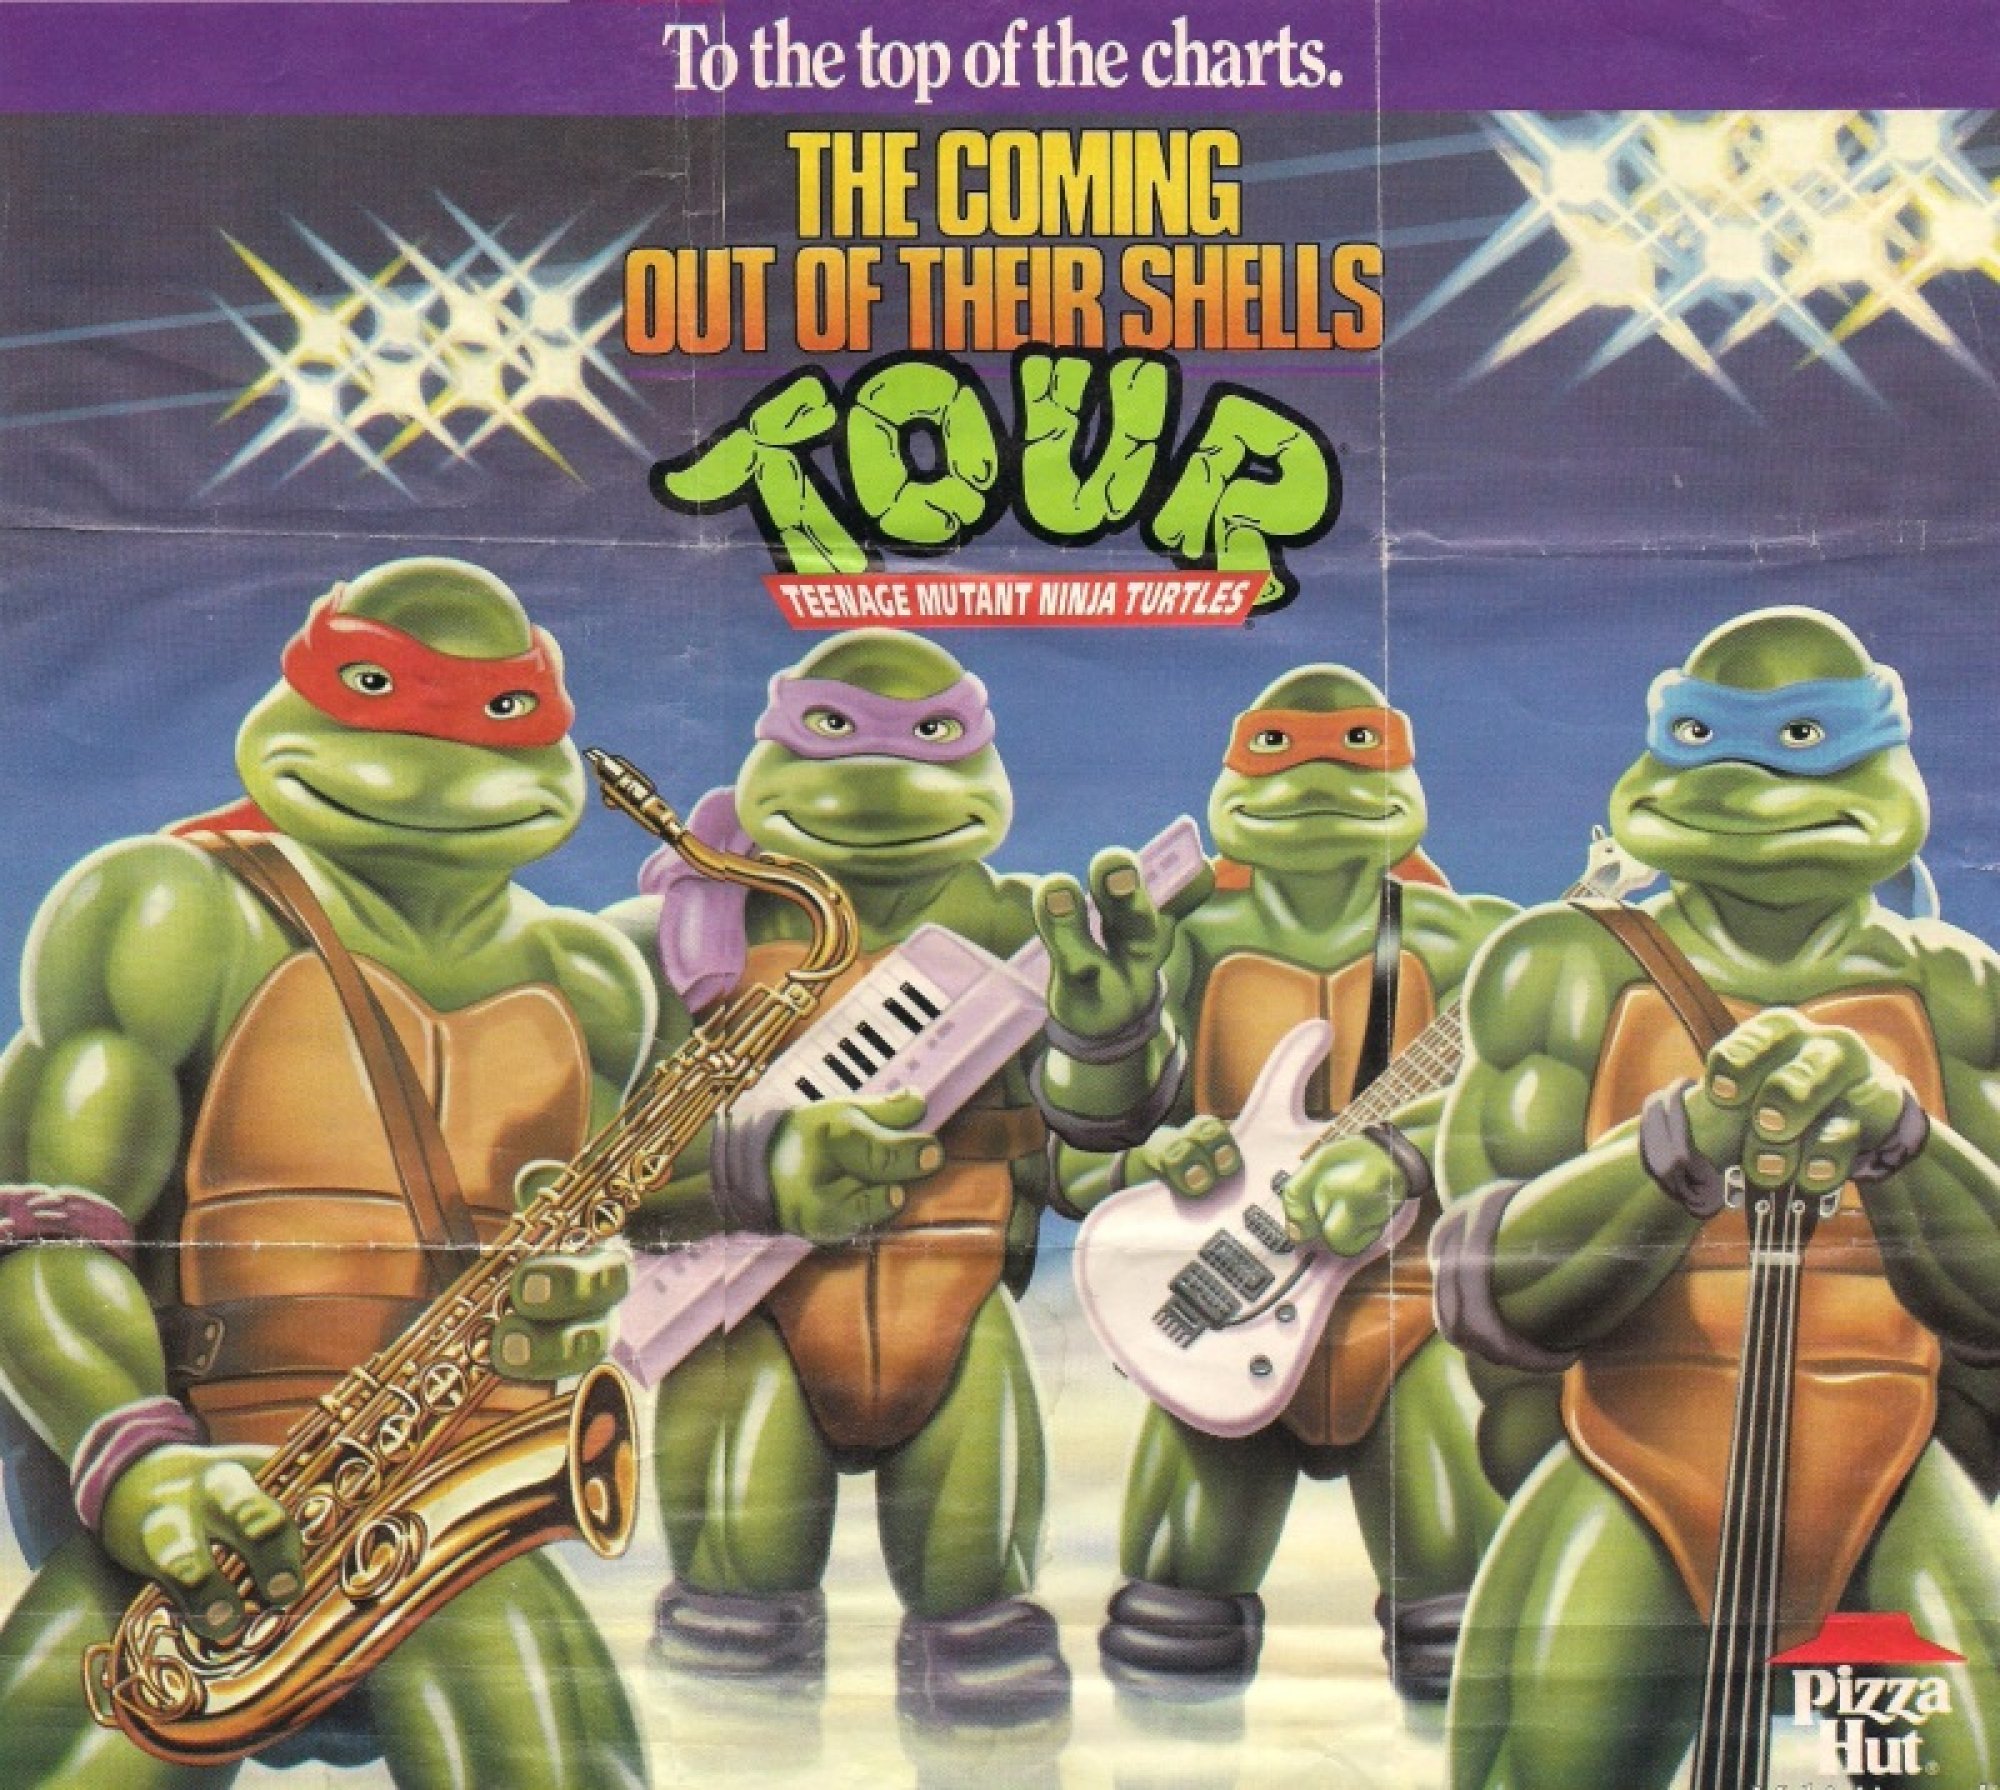 The Turtles began a meteoric rise to 1960s music stardom in